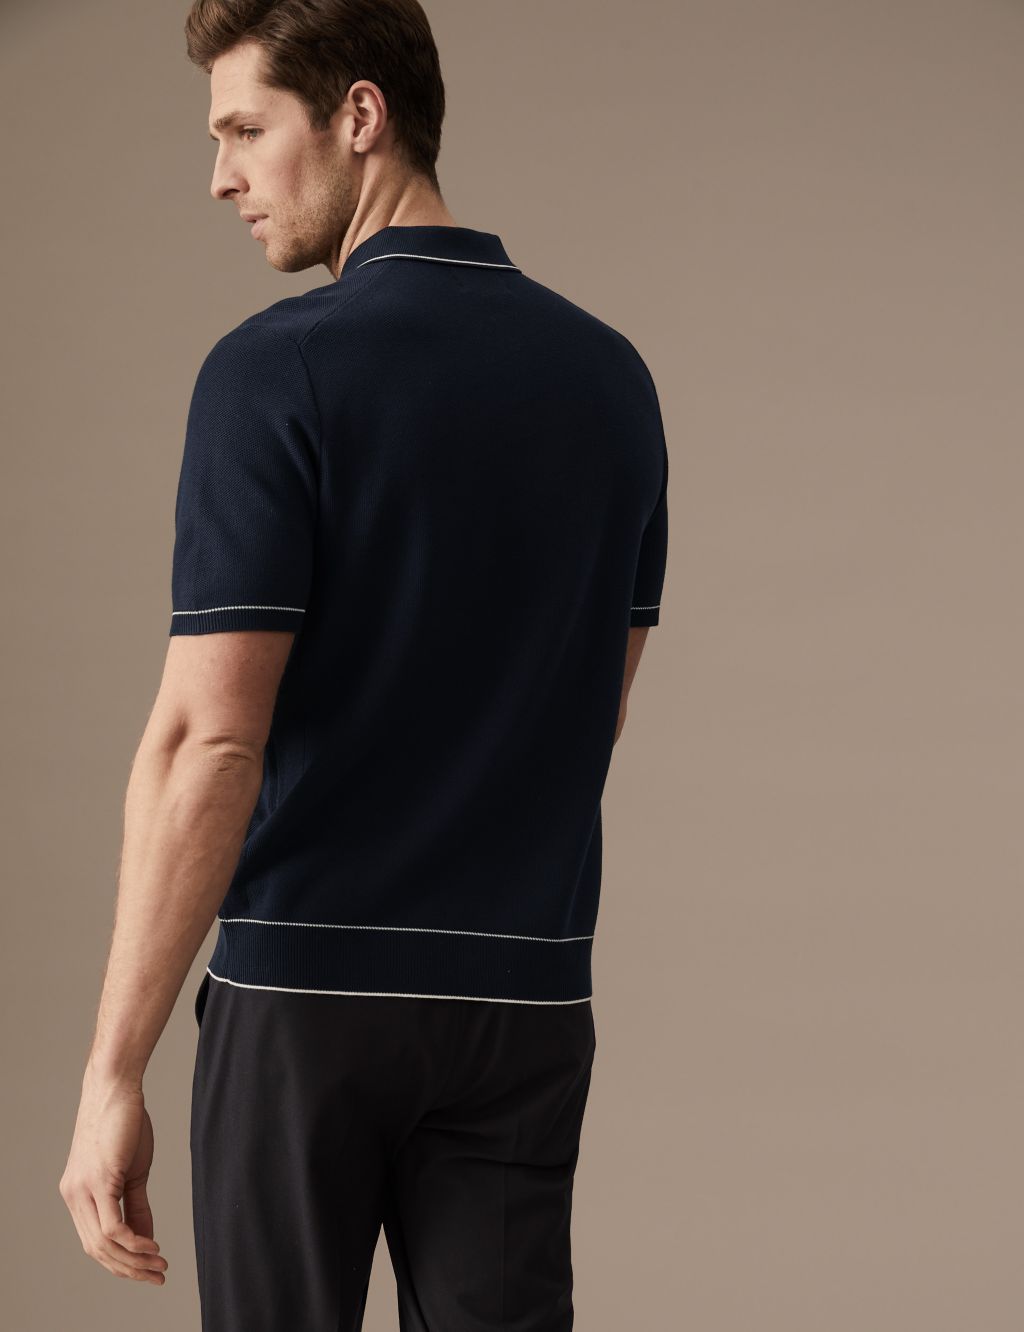 Cotton Modal Blend Knitted Polo Shirt image 3